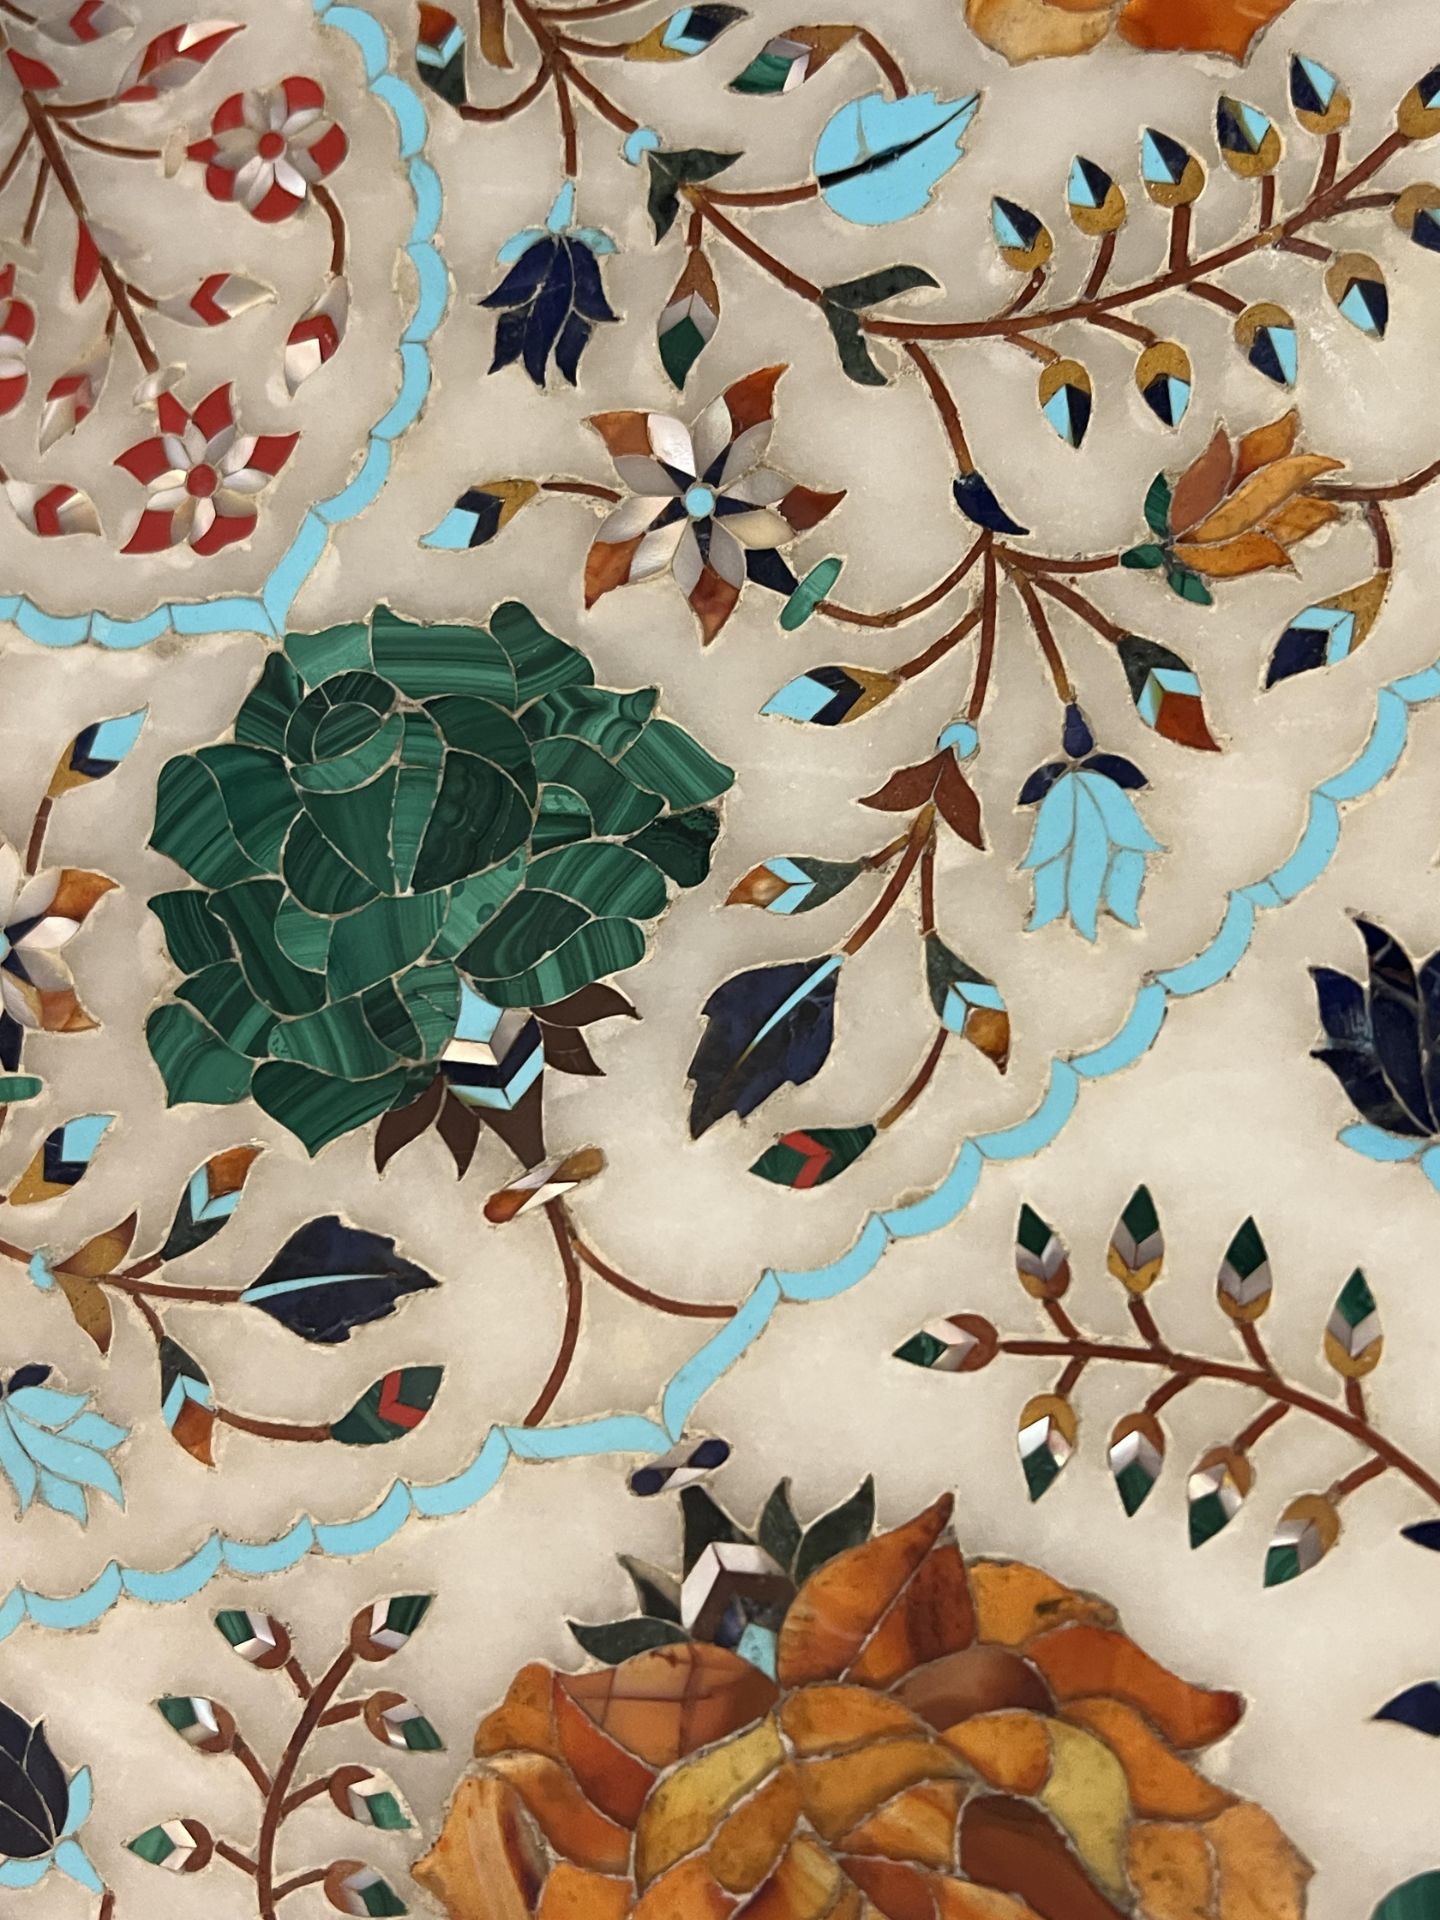 Distinguished Anglo Indian Table inTaj Majal white marble inlays of semi-precious stones, Indian wor - Image 4 of 6